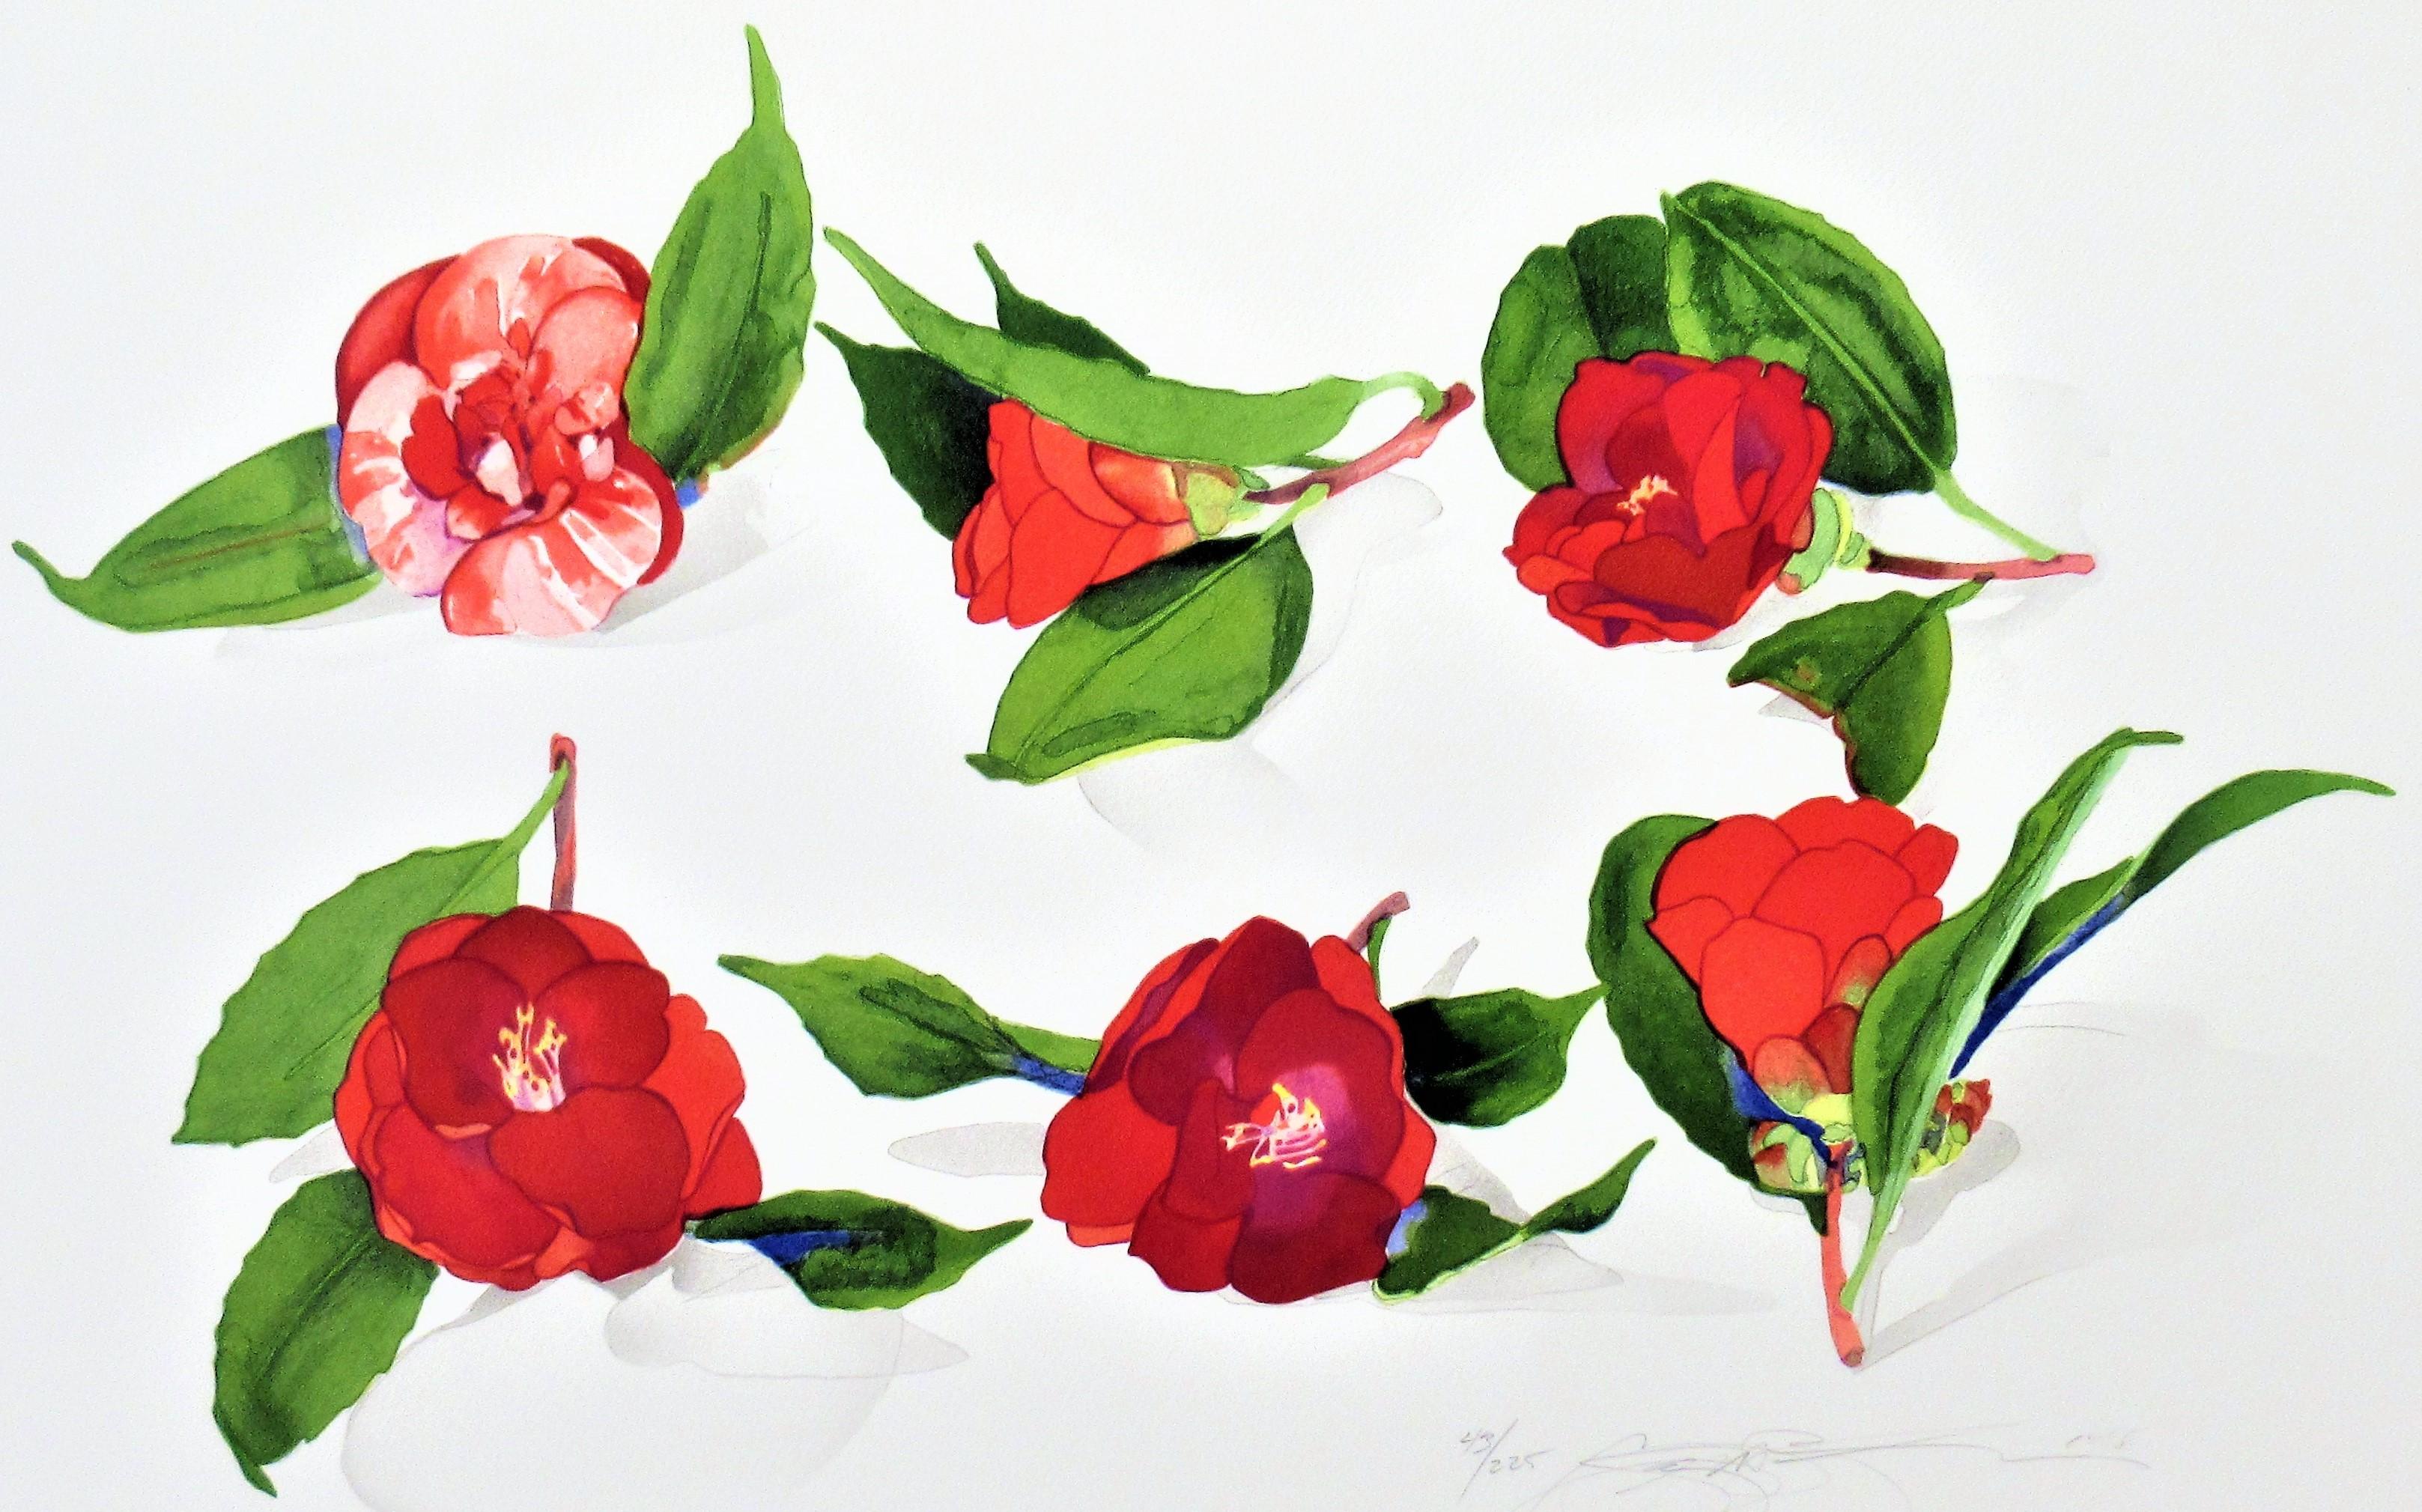 6 Camellias After An Unknown Japanese Artist - Print by Gary Bukovnik